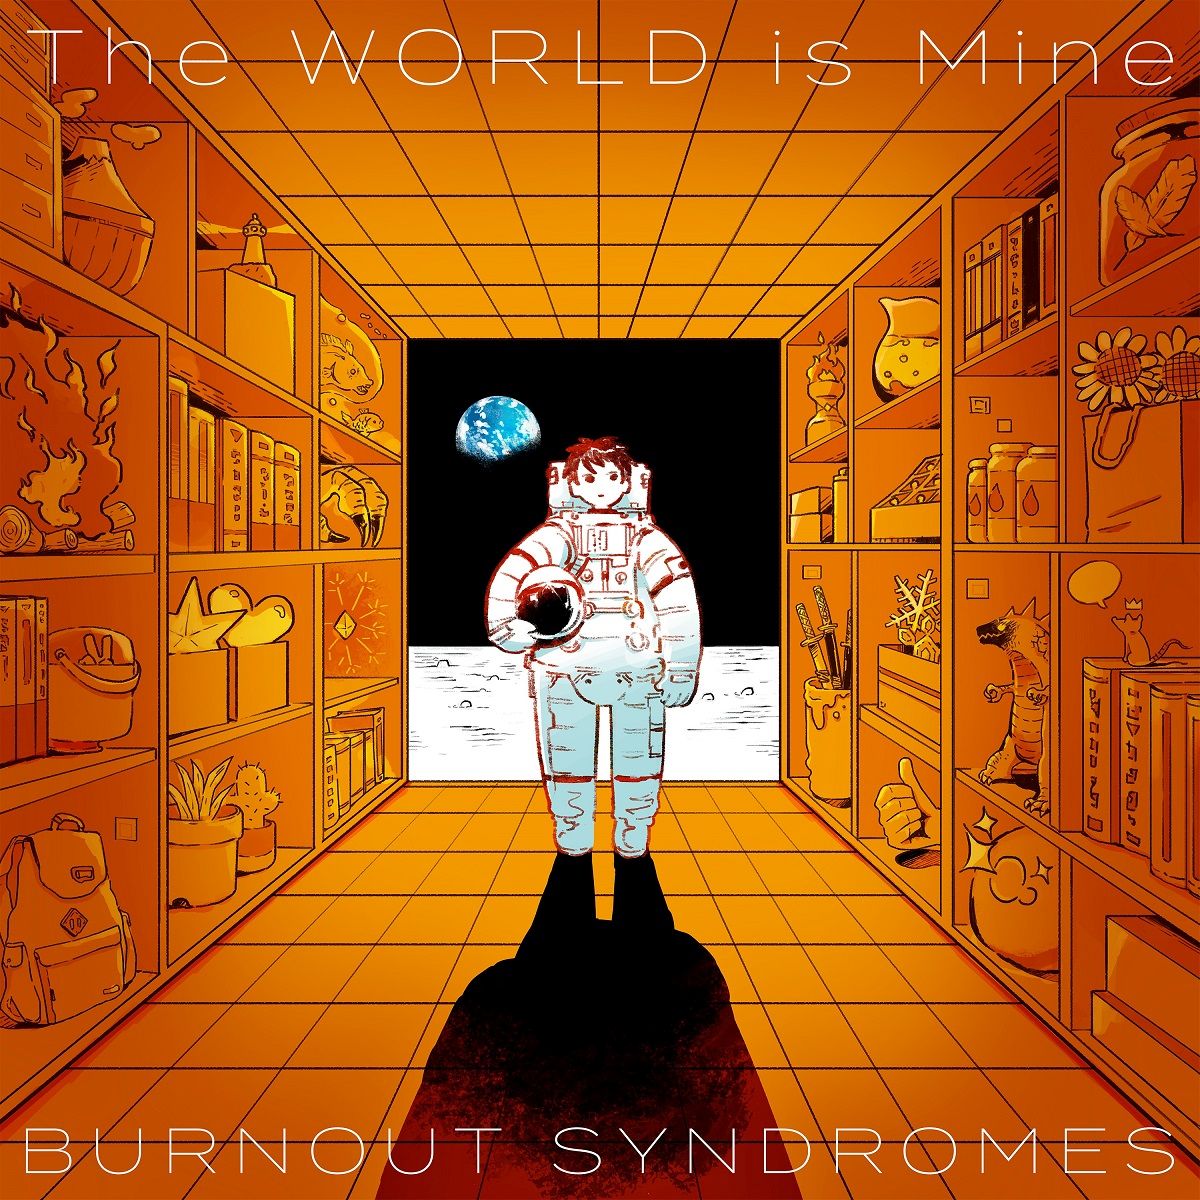 Cover art for『BURNOUT SYNDROMES - The WORLD is Mine』from the release『The WORLD is Mine』